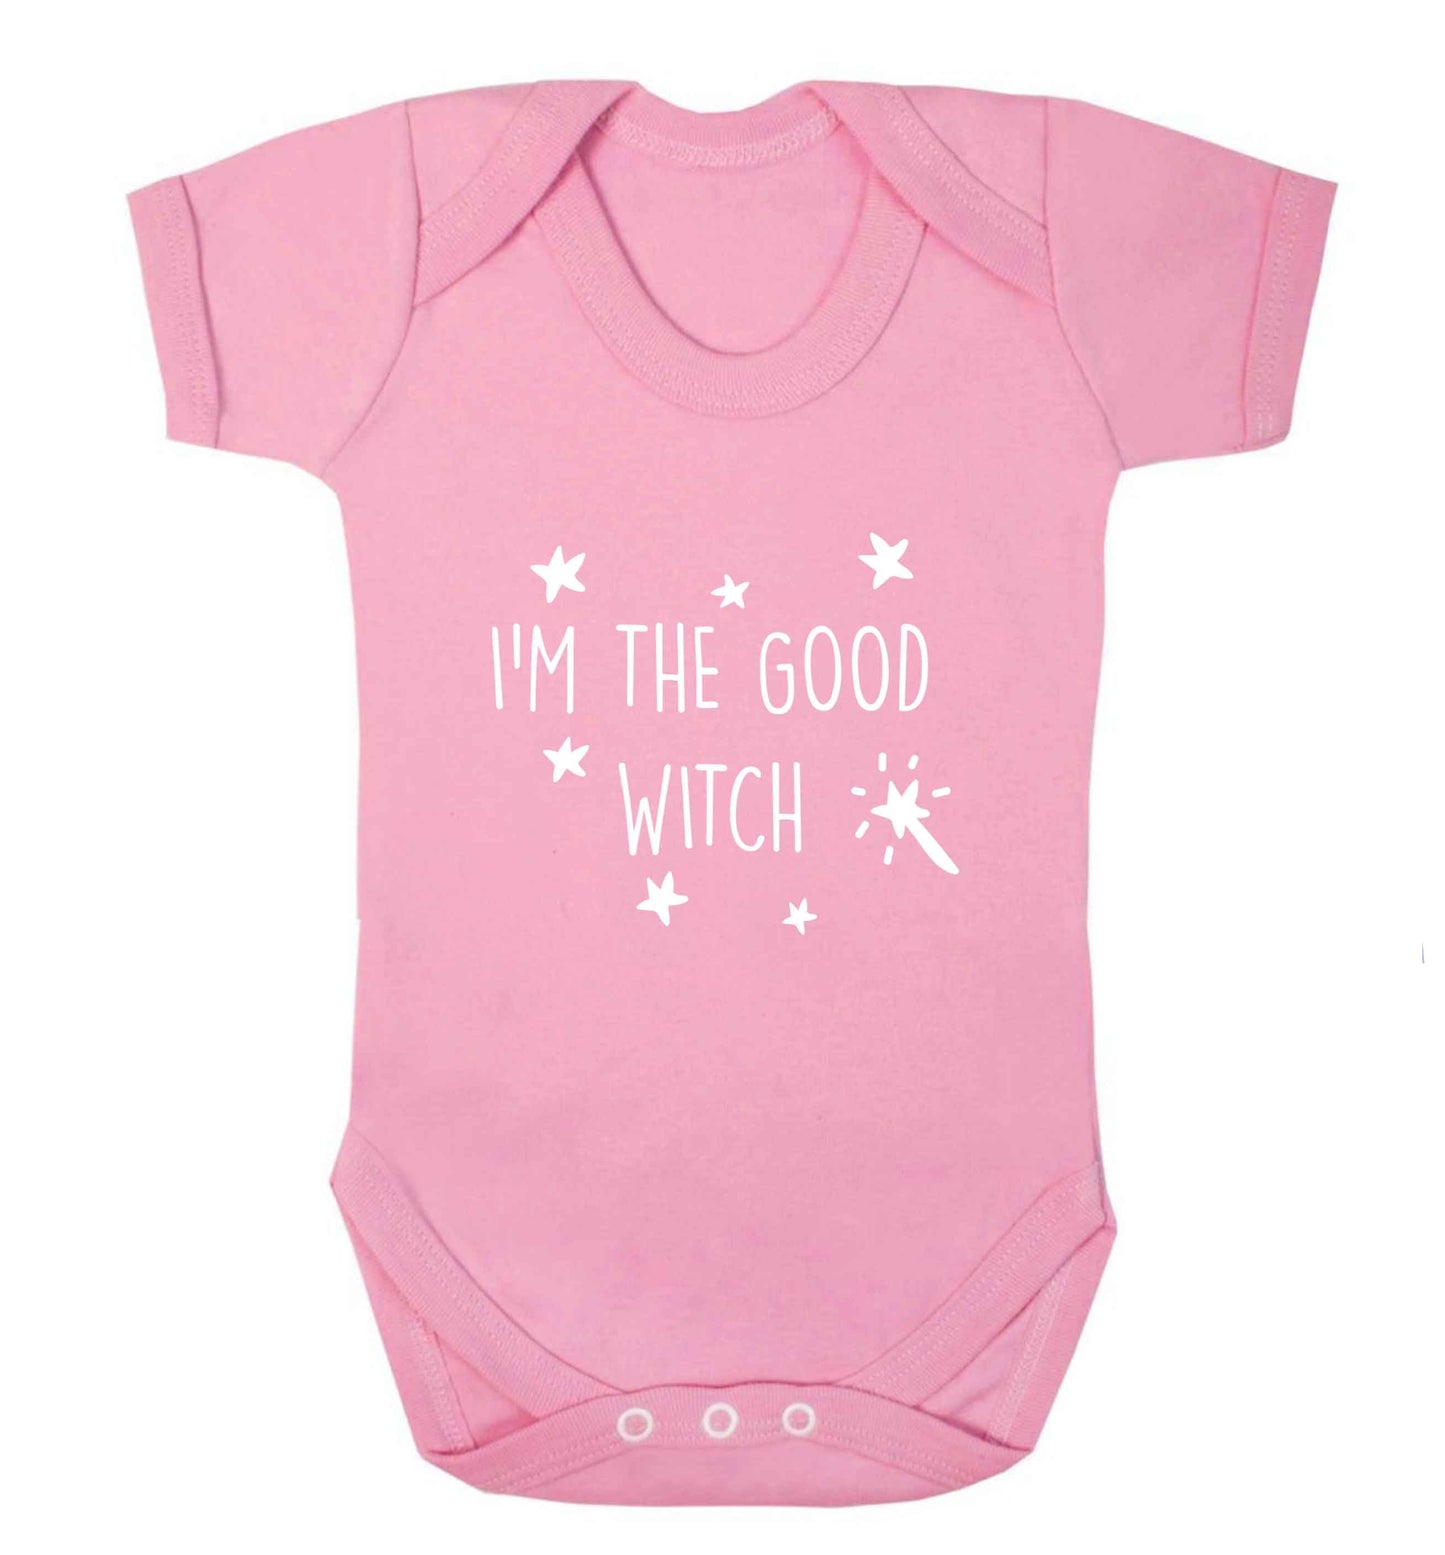 Good witch baby vest pale pink 18-24 months